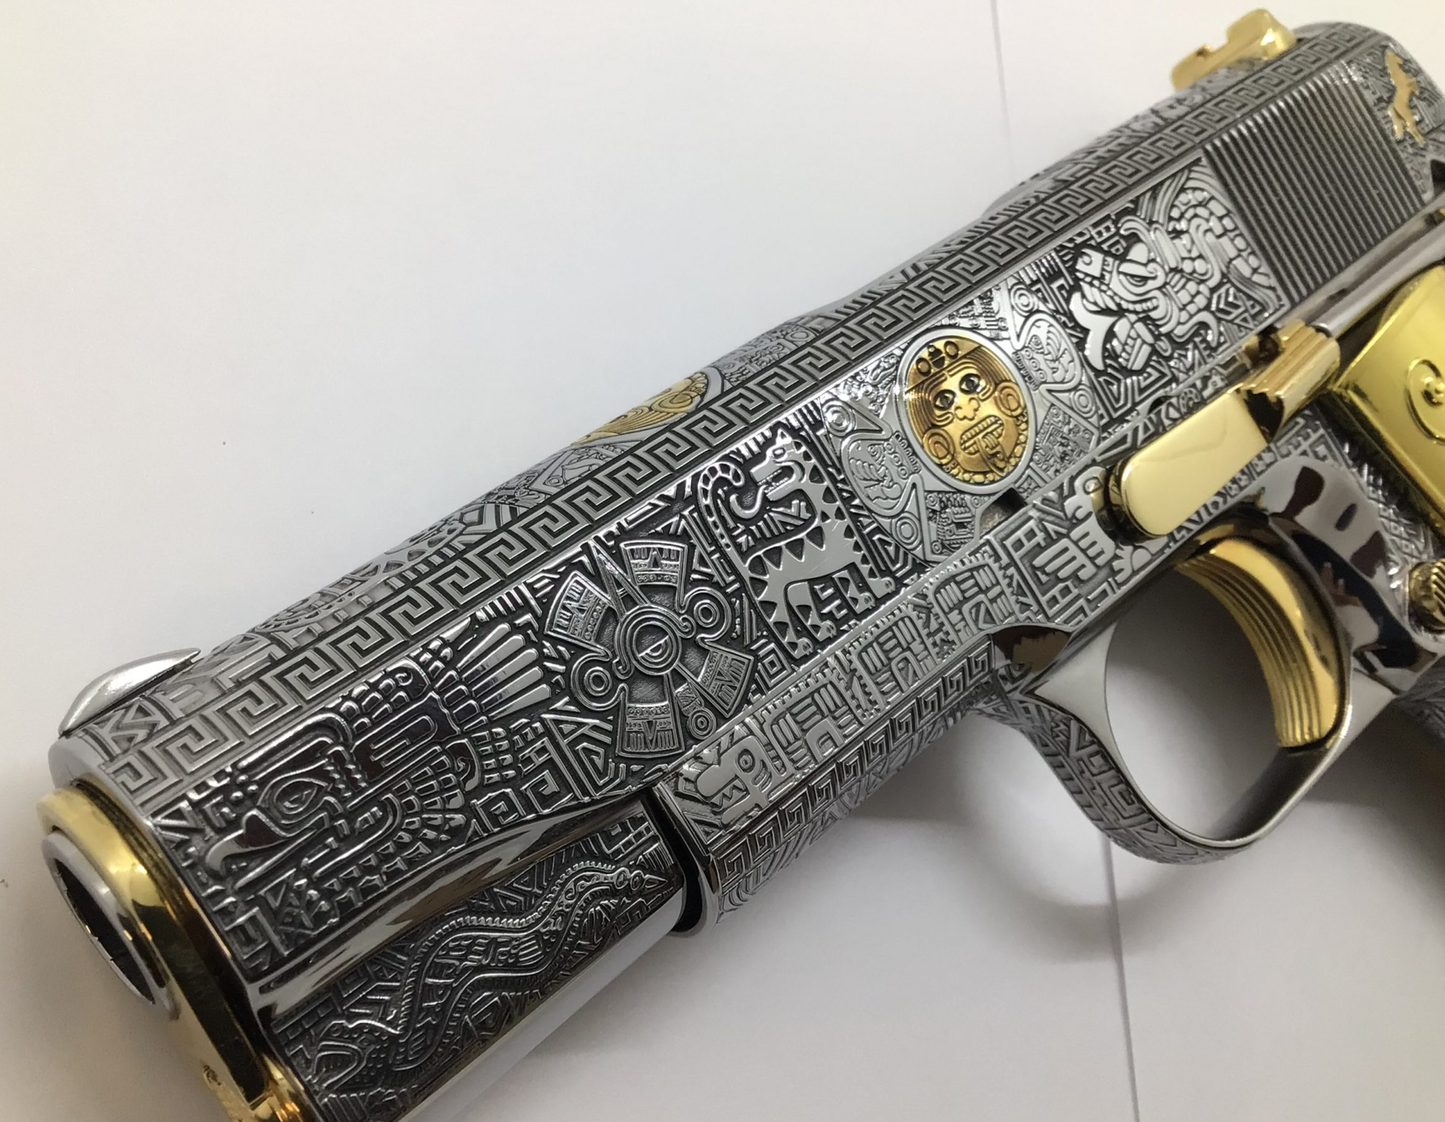 1911 - Beretta 92 Engraving and gold plating service